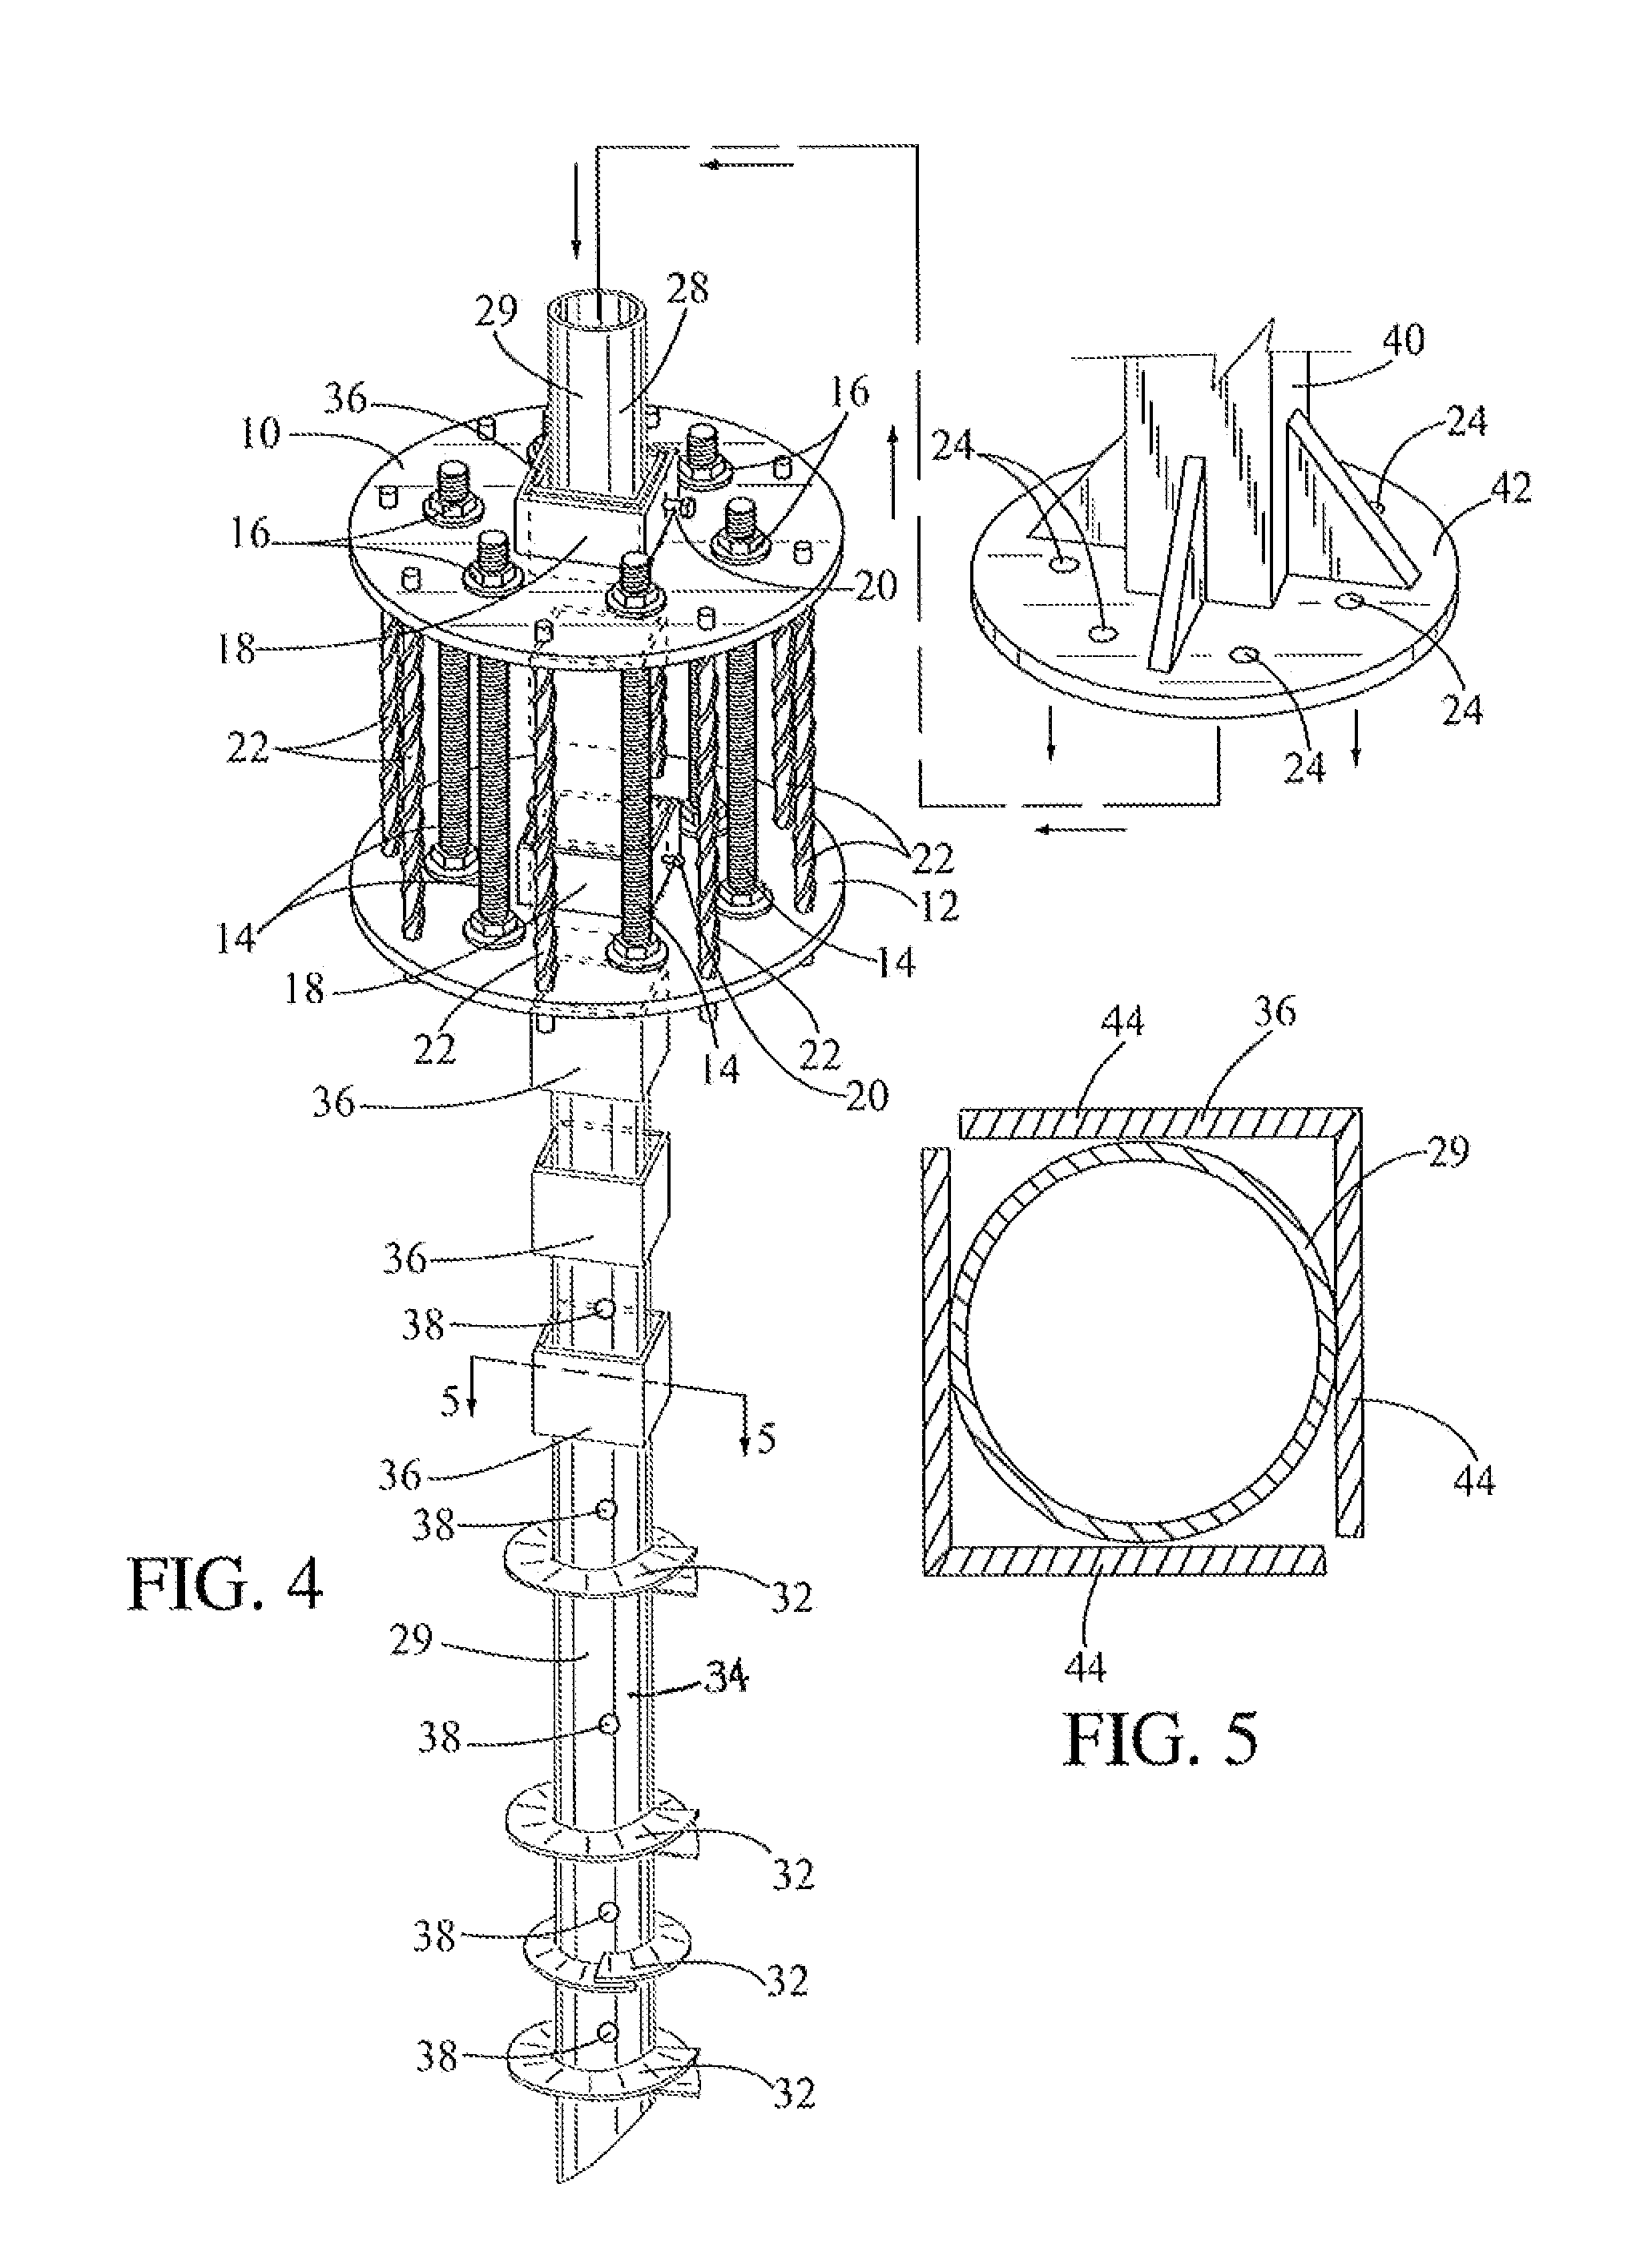 Helical pier with adjustable pierhead plates for supporting a structure above a ground surface